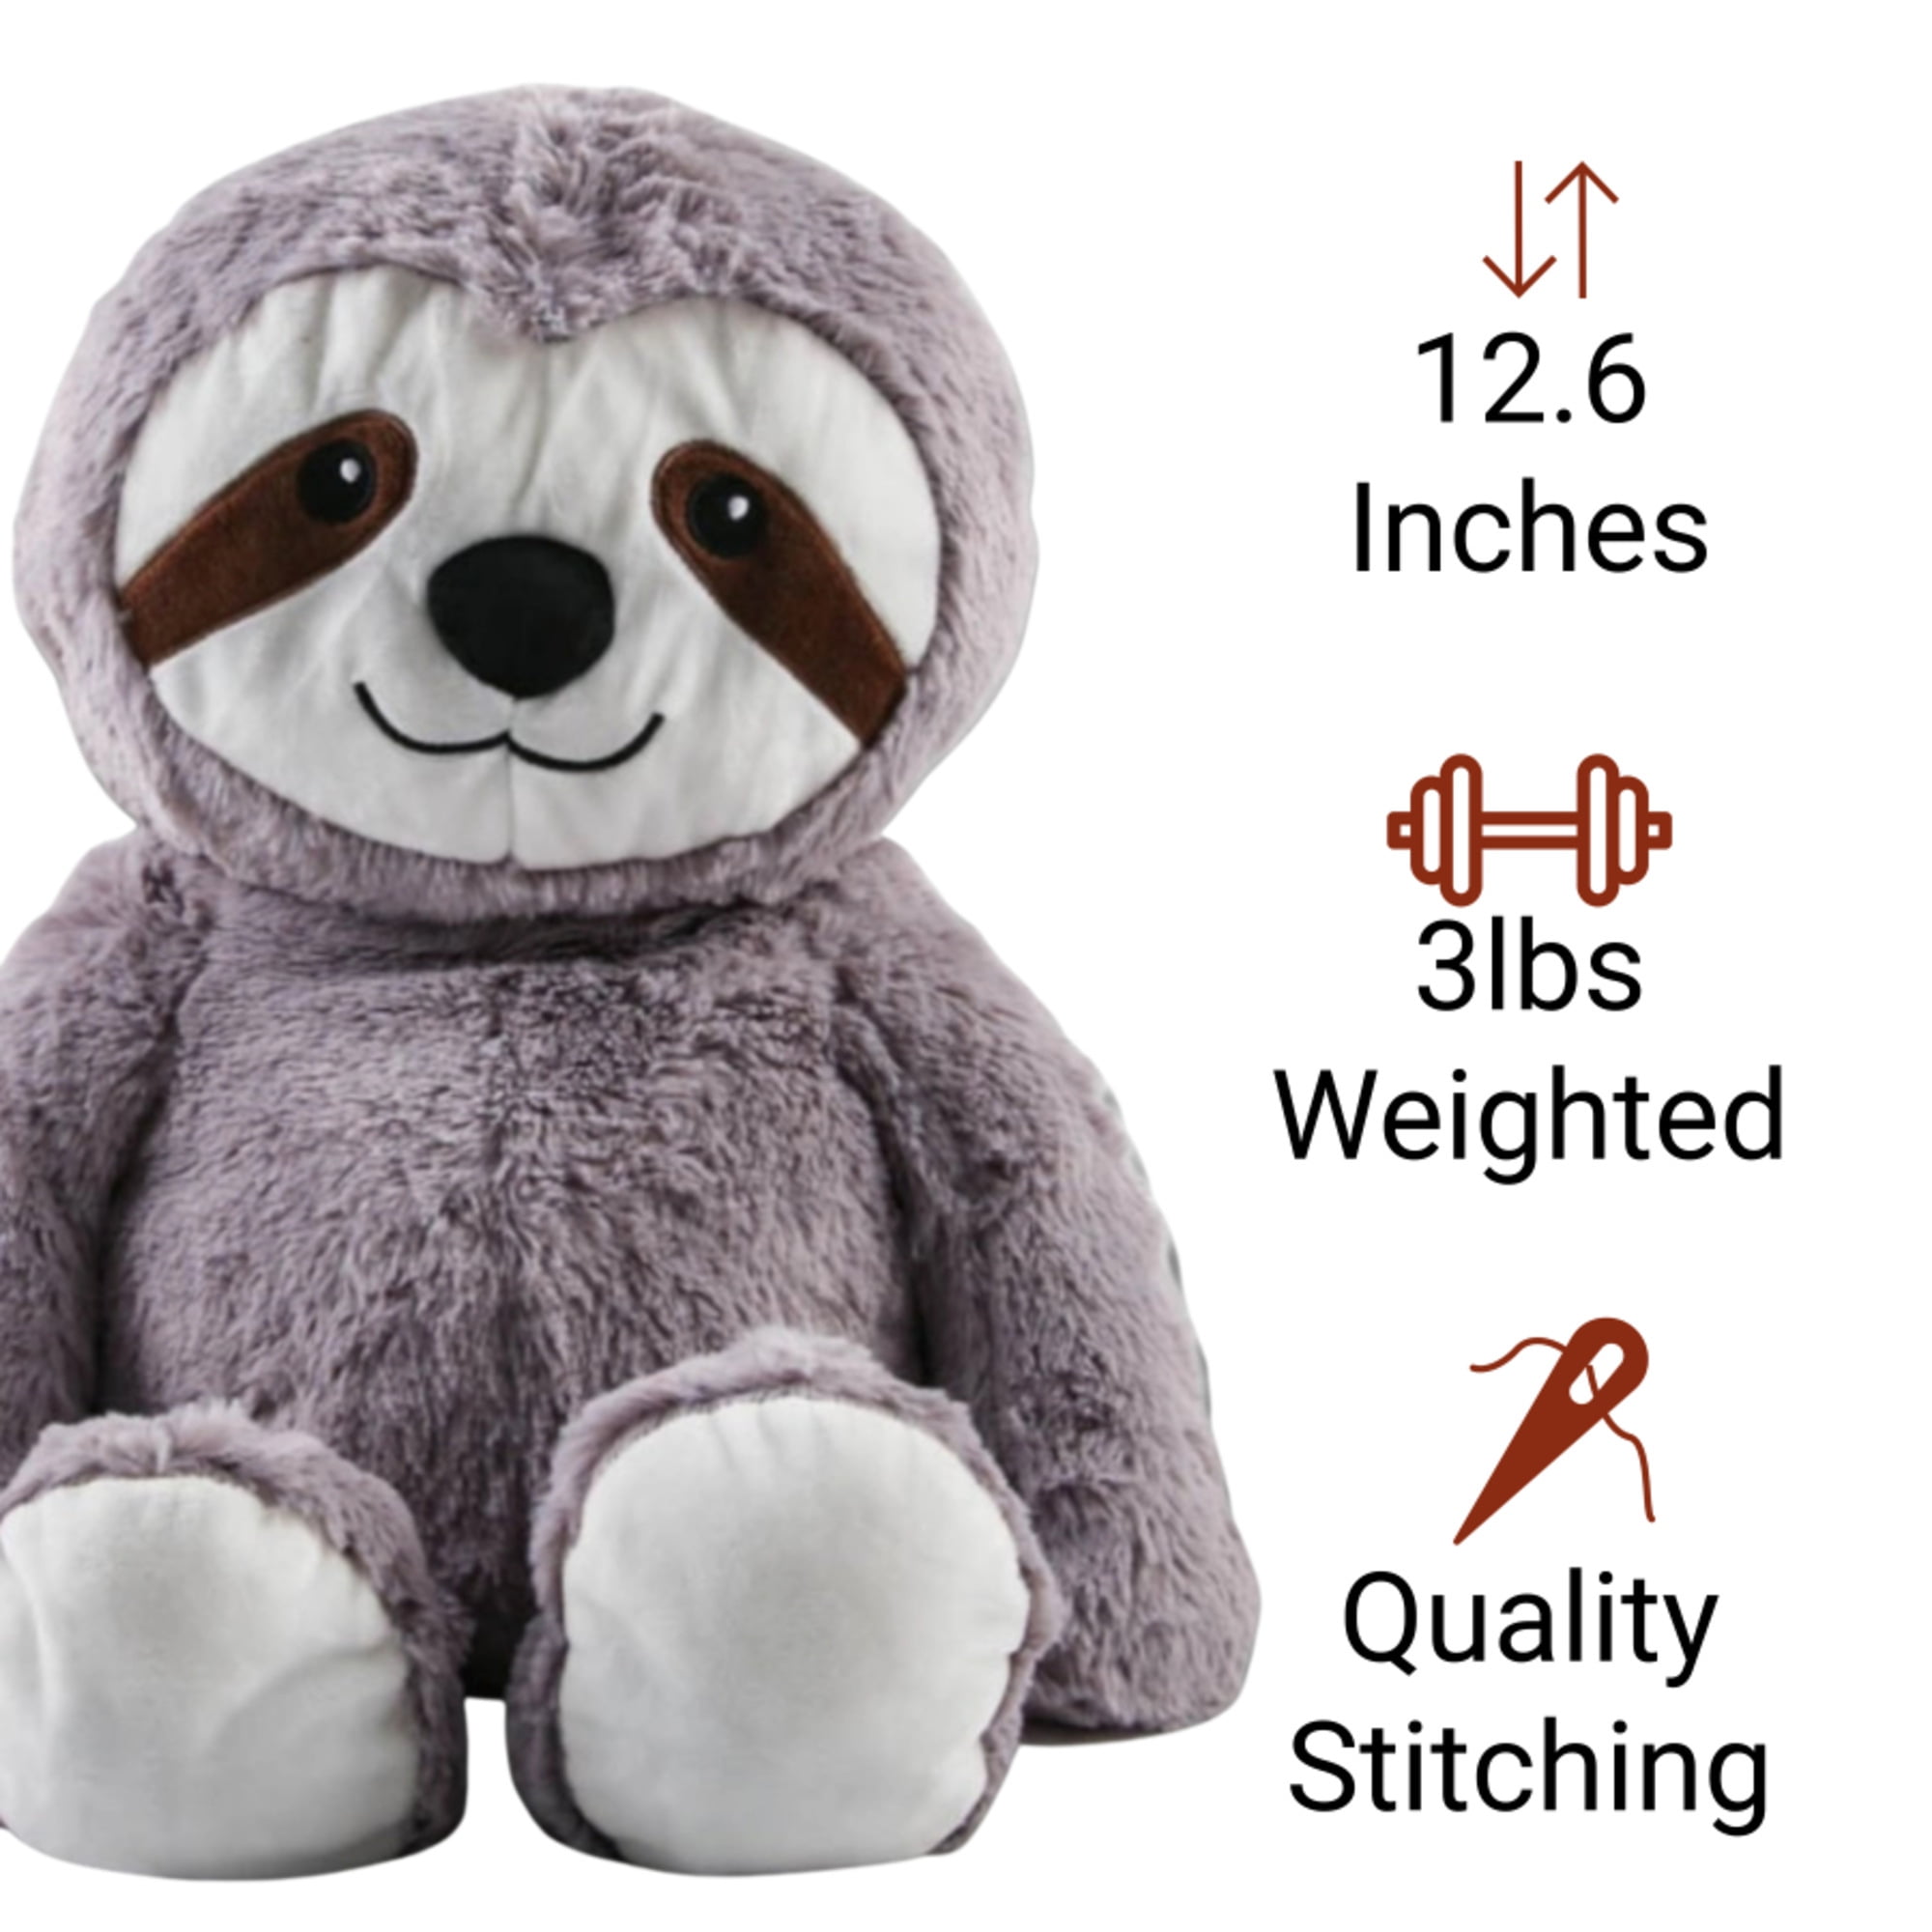 Sloth Weighted Stuffed Animal Plush Toy - 2.5 Lb Sensory Tool for Stre –